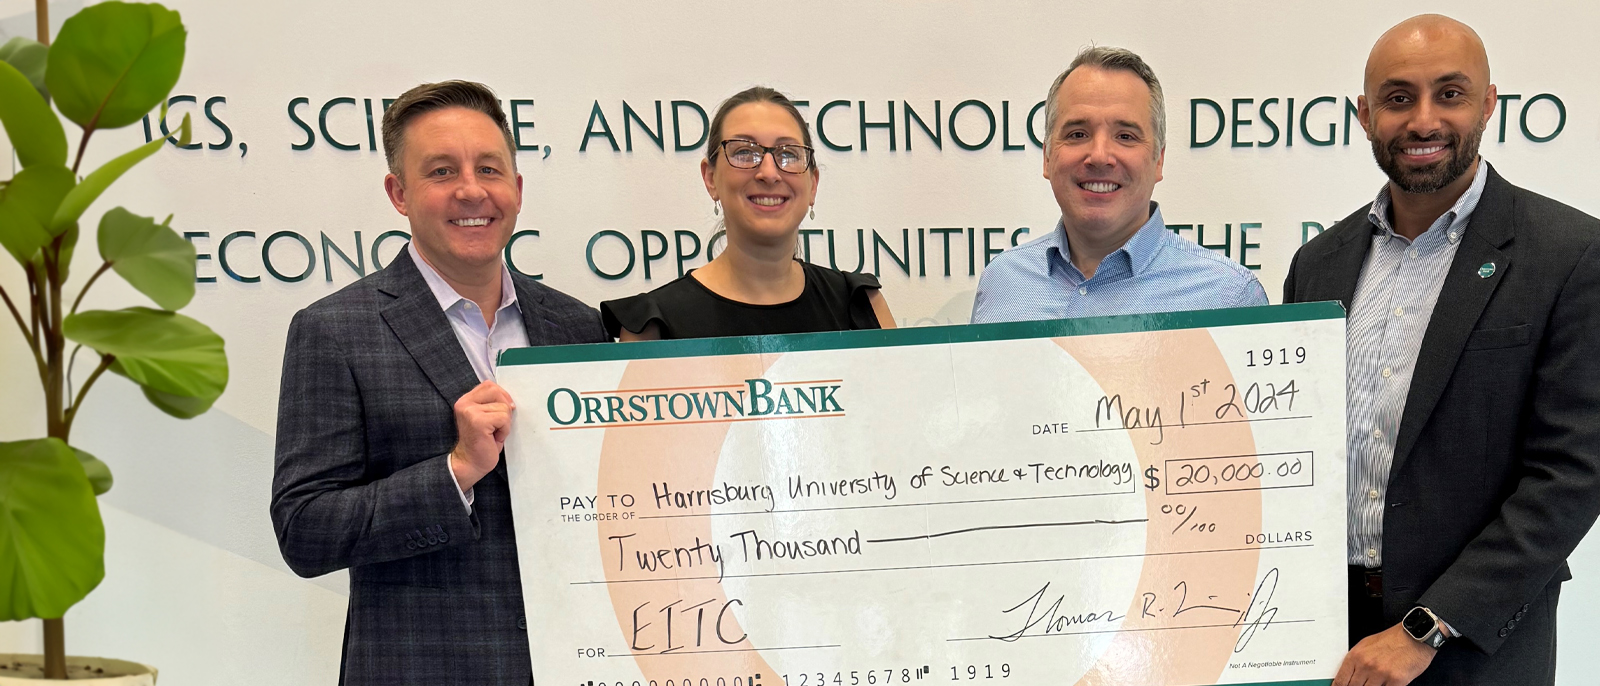 EITC Donation from Orrstown Bank Supports Early-College Programs at Harrisburg University